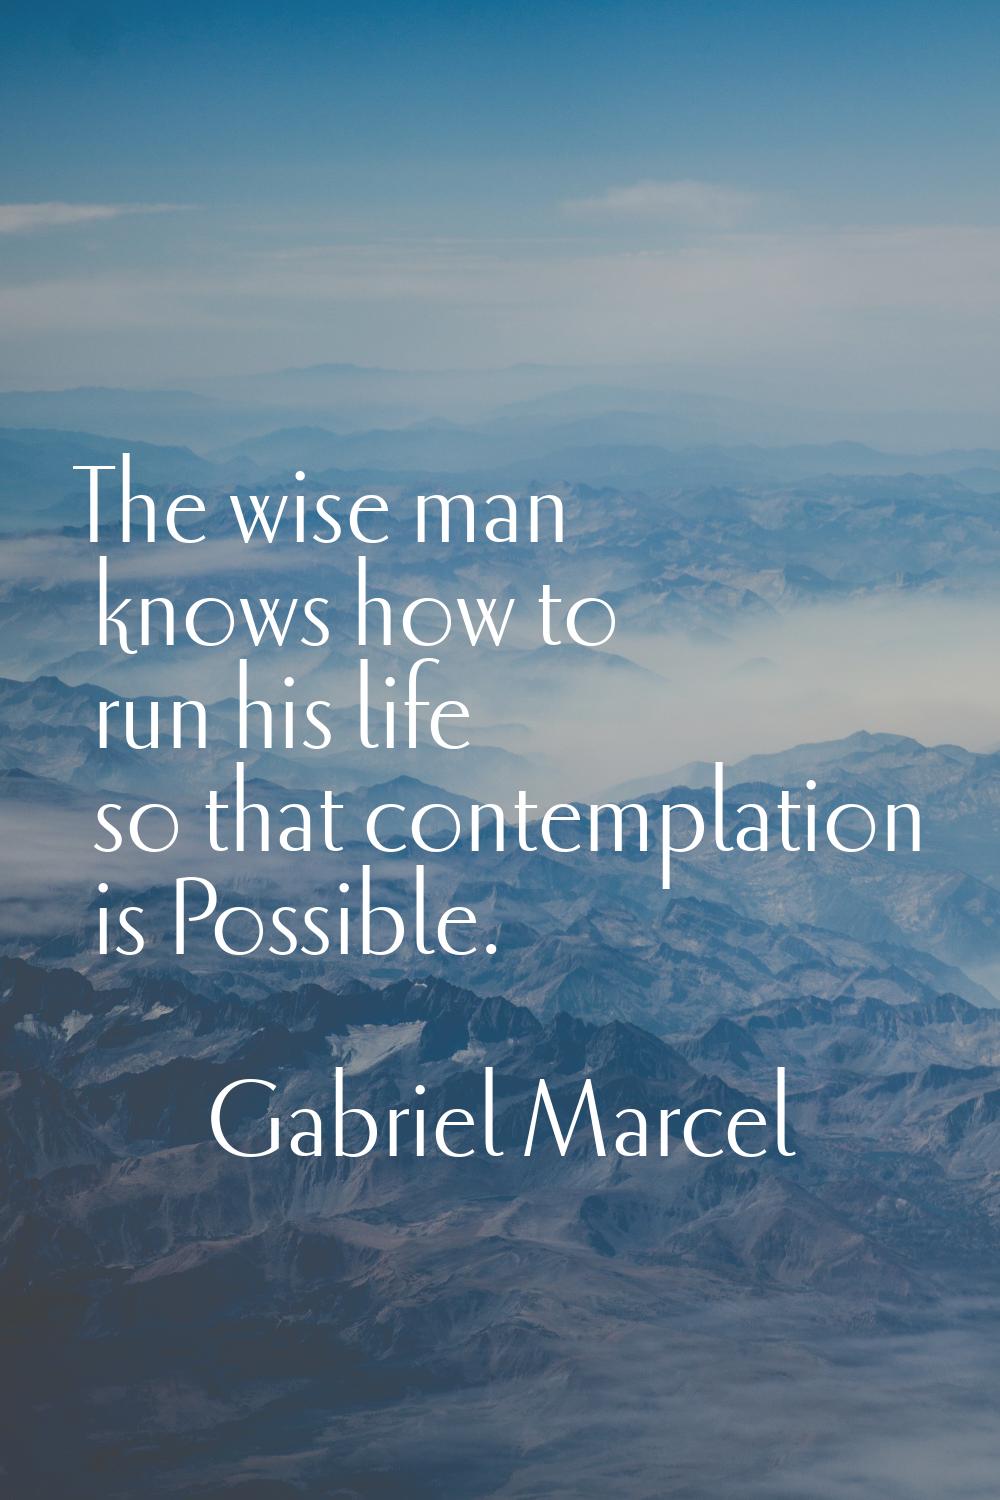 The wise man knows how to run his life so that contemplation is Possible.